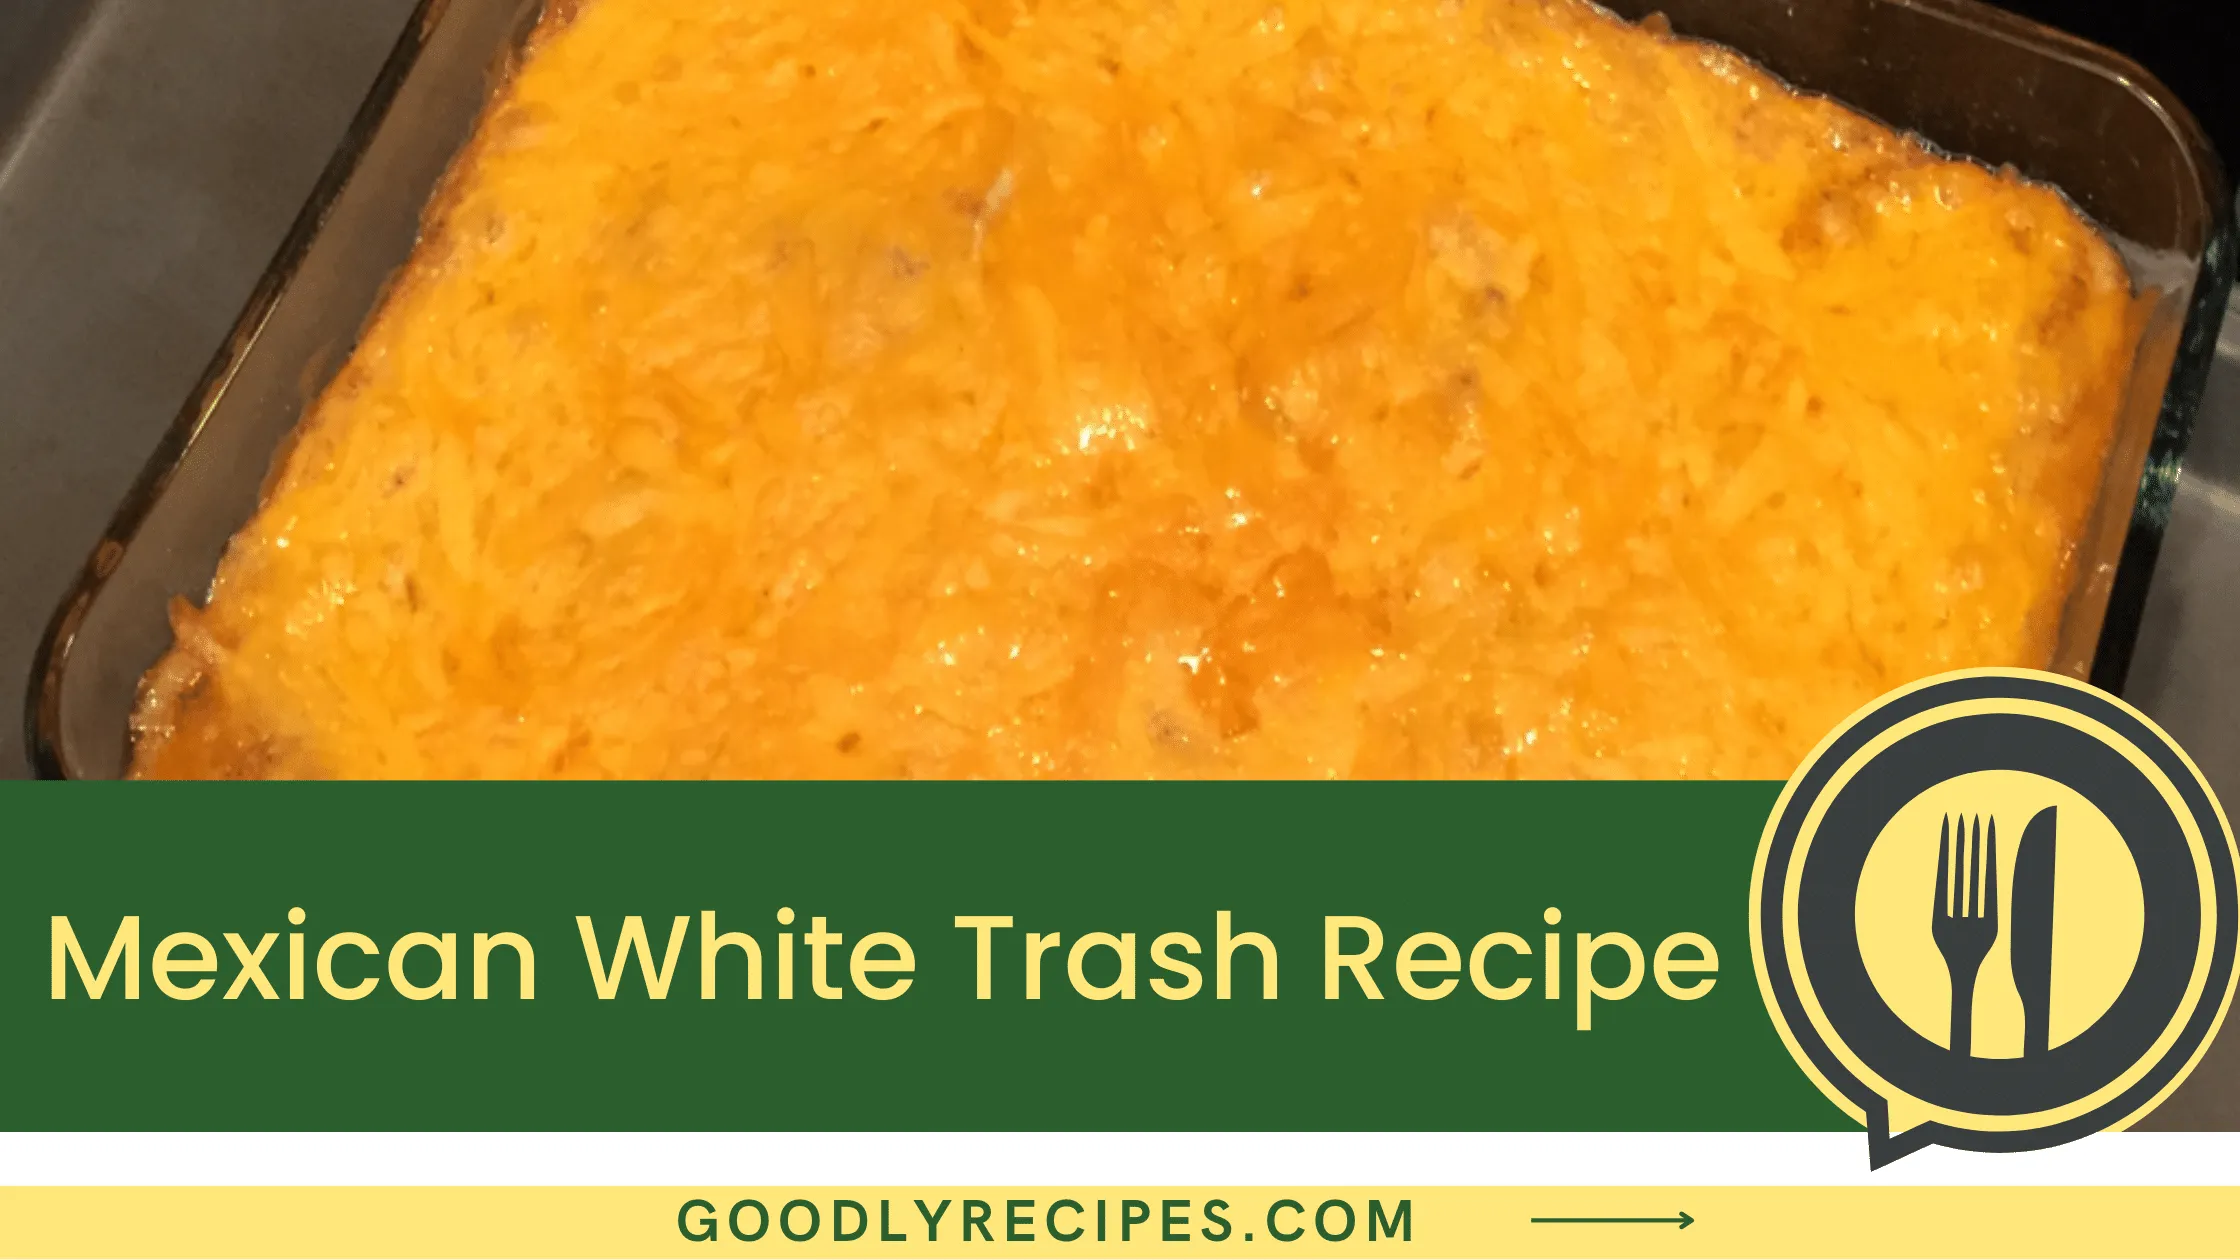 Mexican White Trash Recipe - For Food Lovers